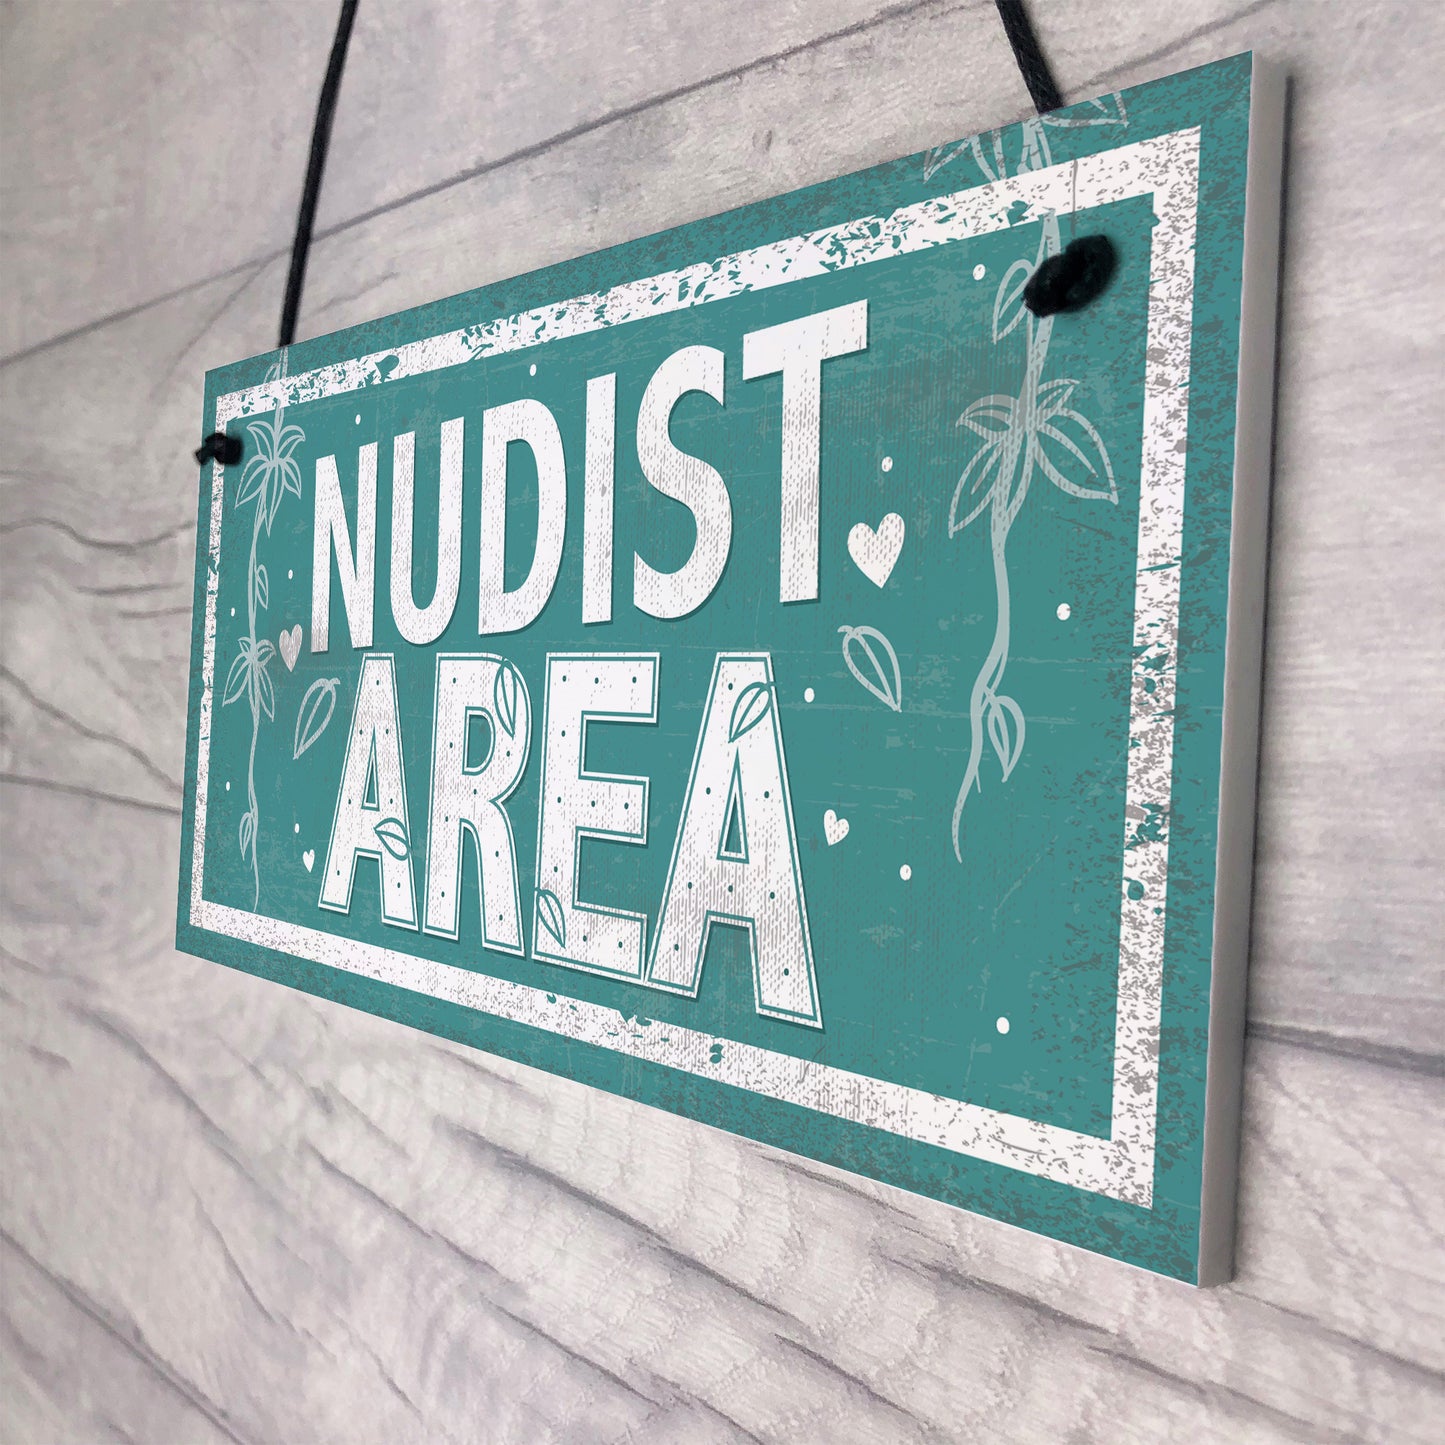 Nudist Area Hot Tub Sign Chic Novelty Garden Swimming Pool Gift